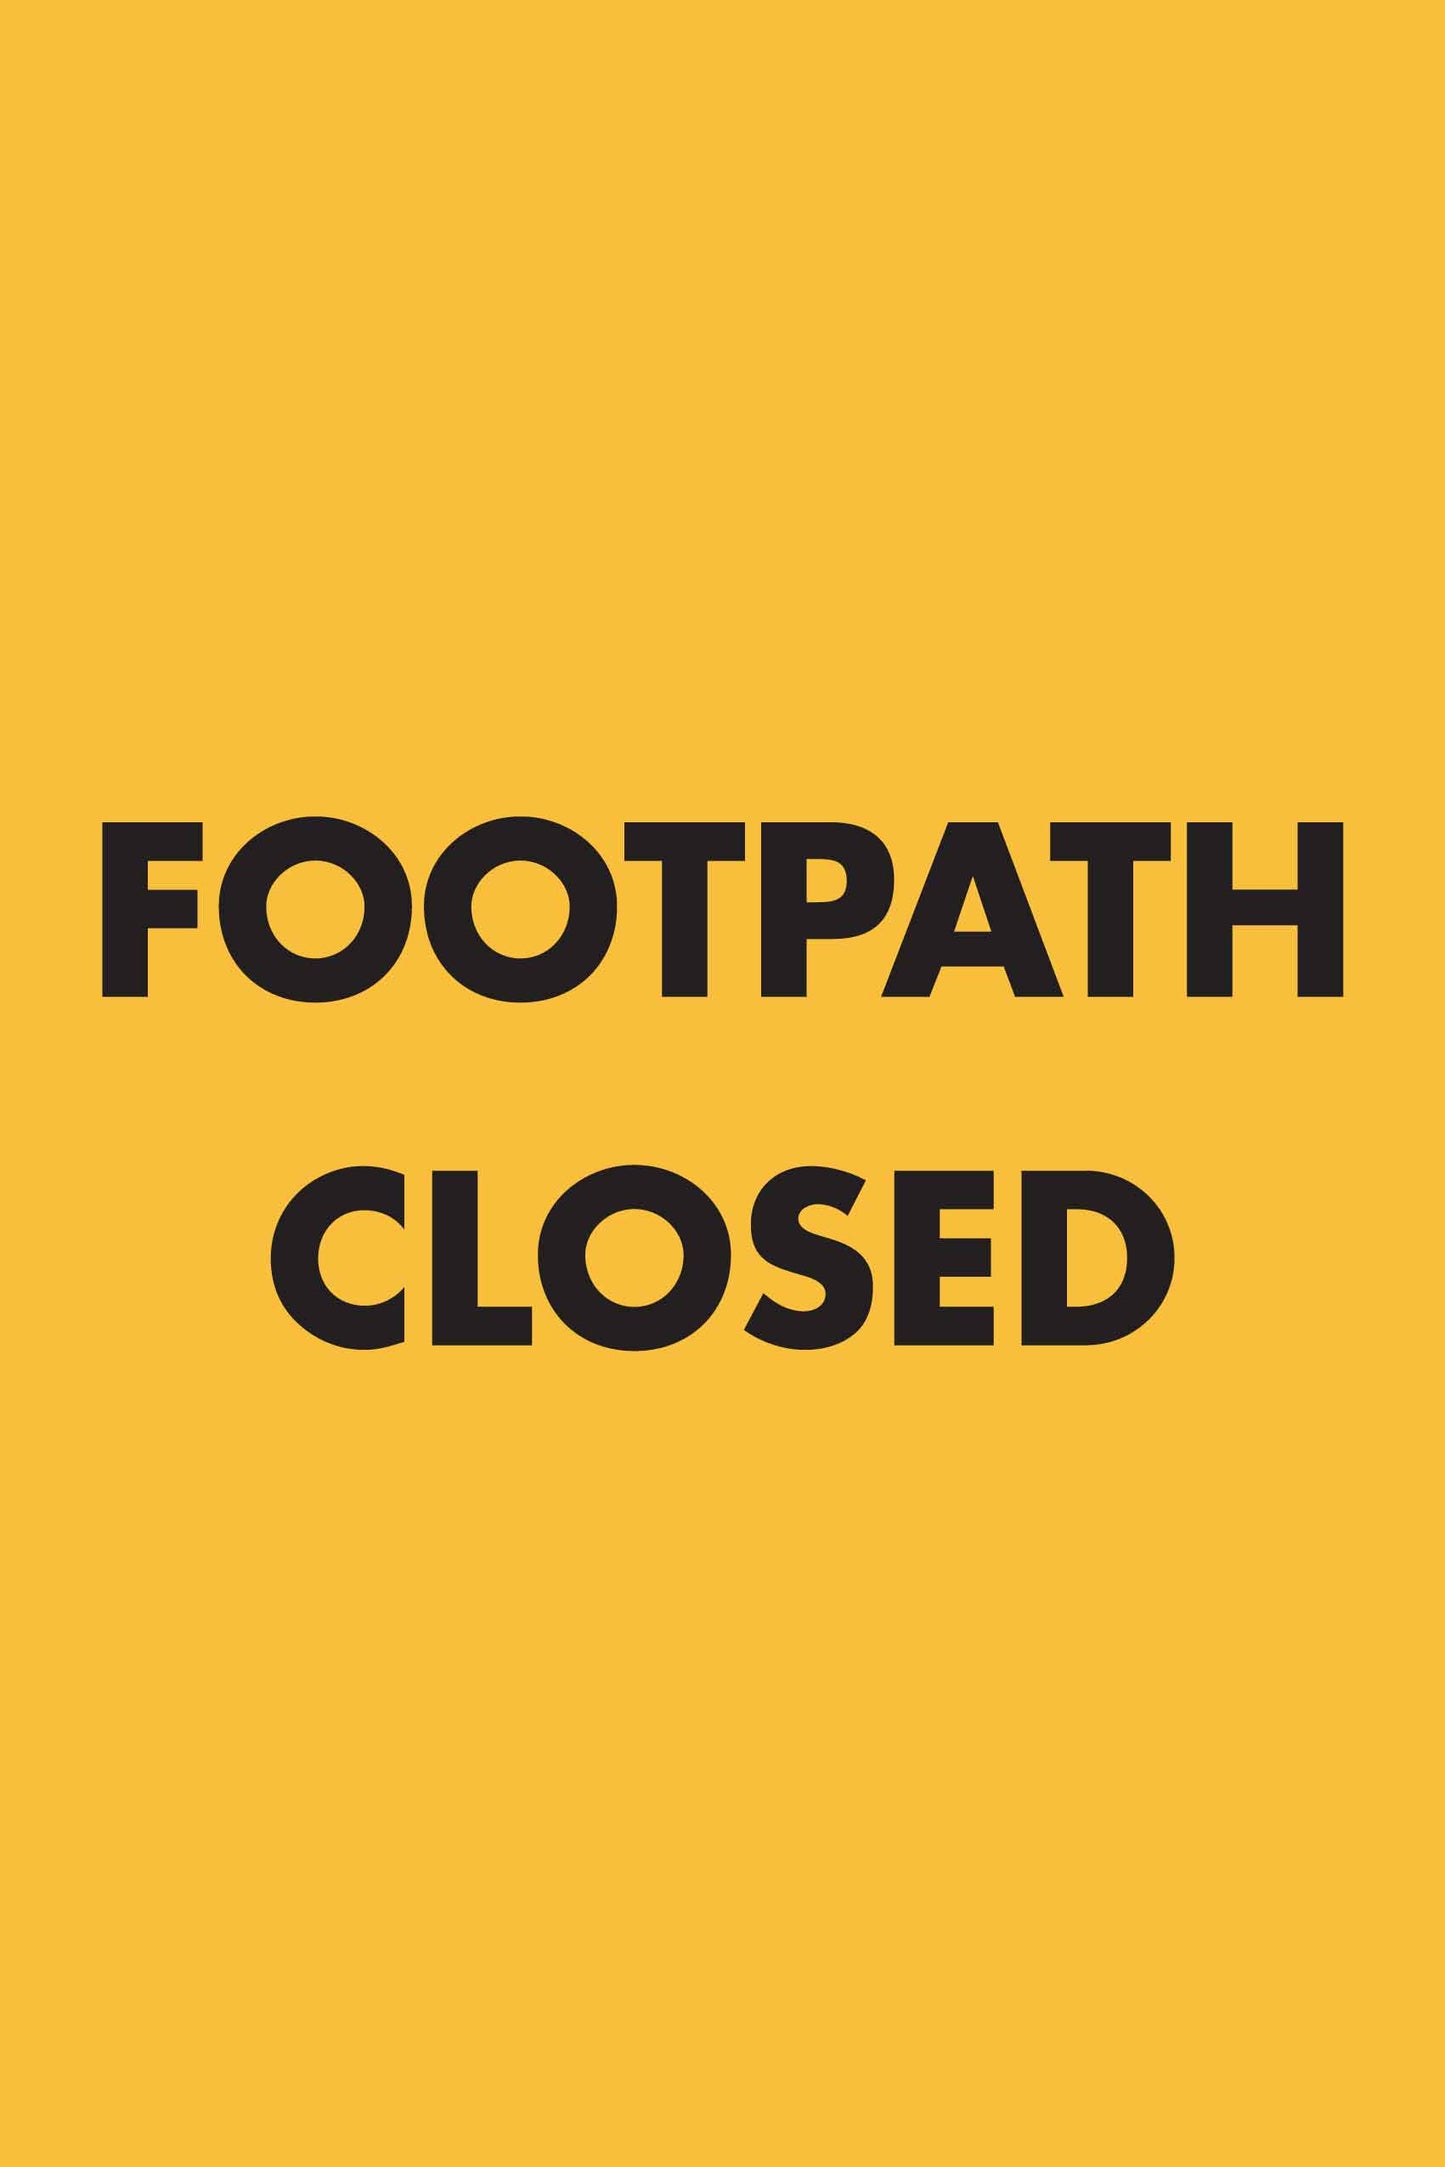 Footpath Closed - Portrait Sign